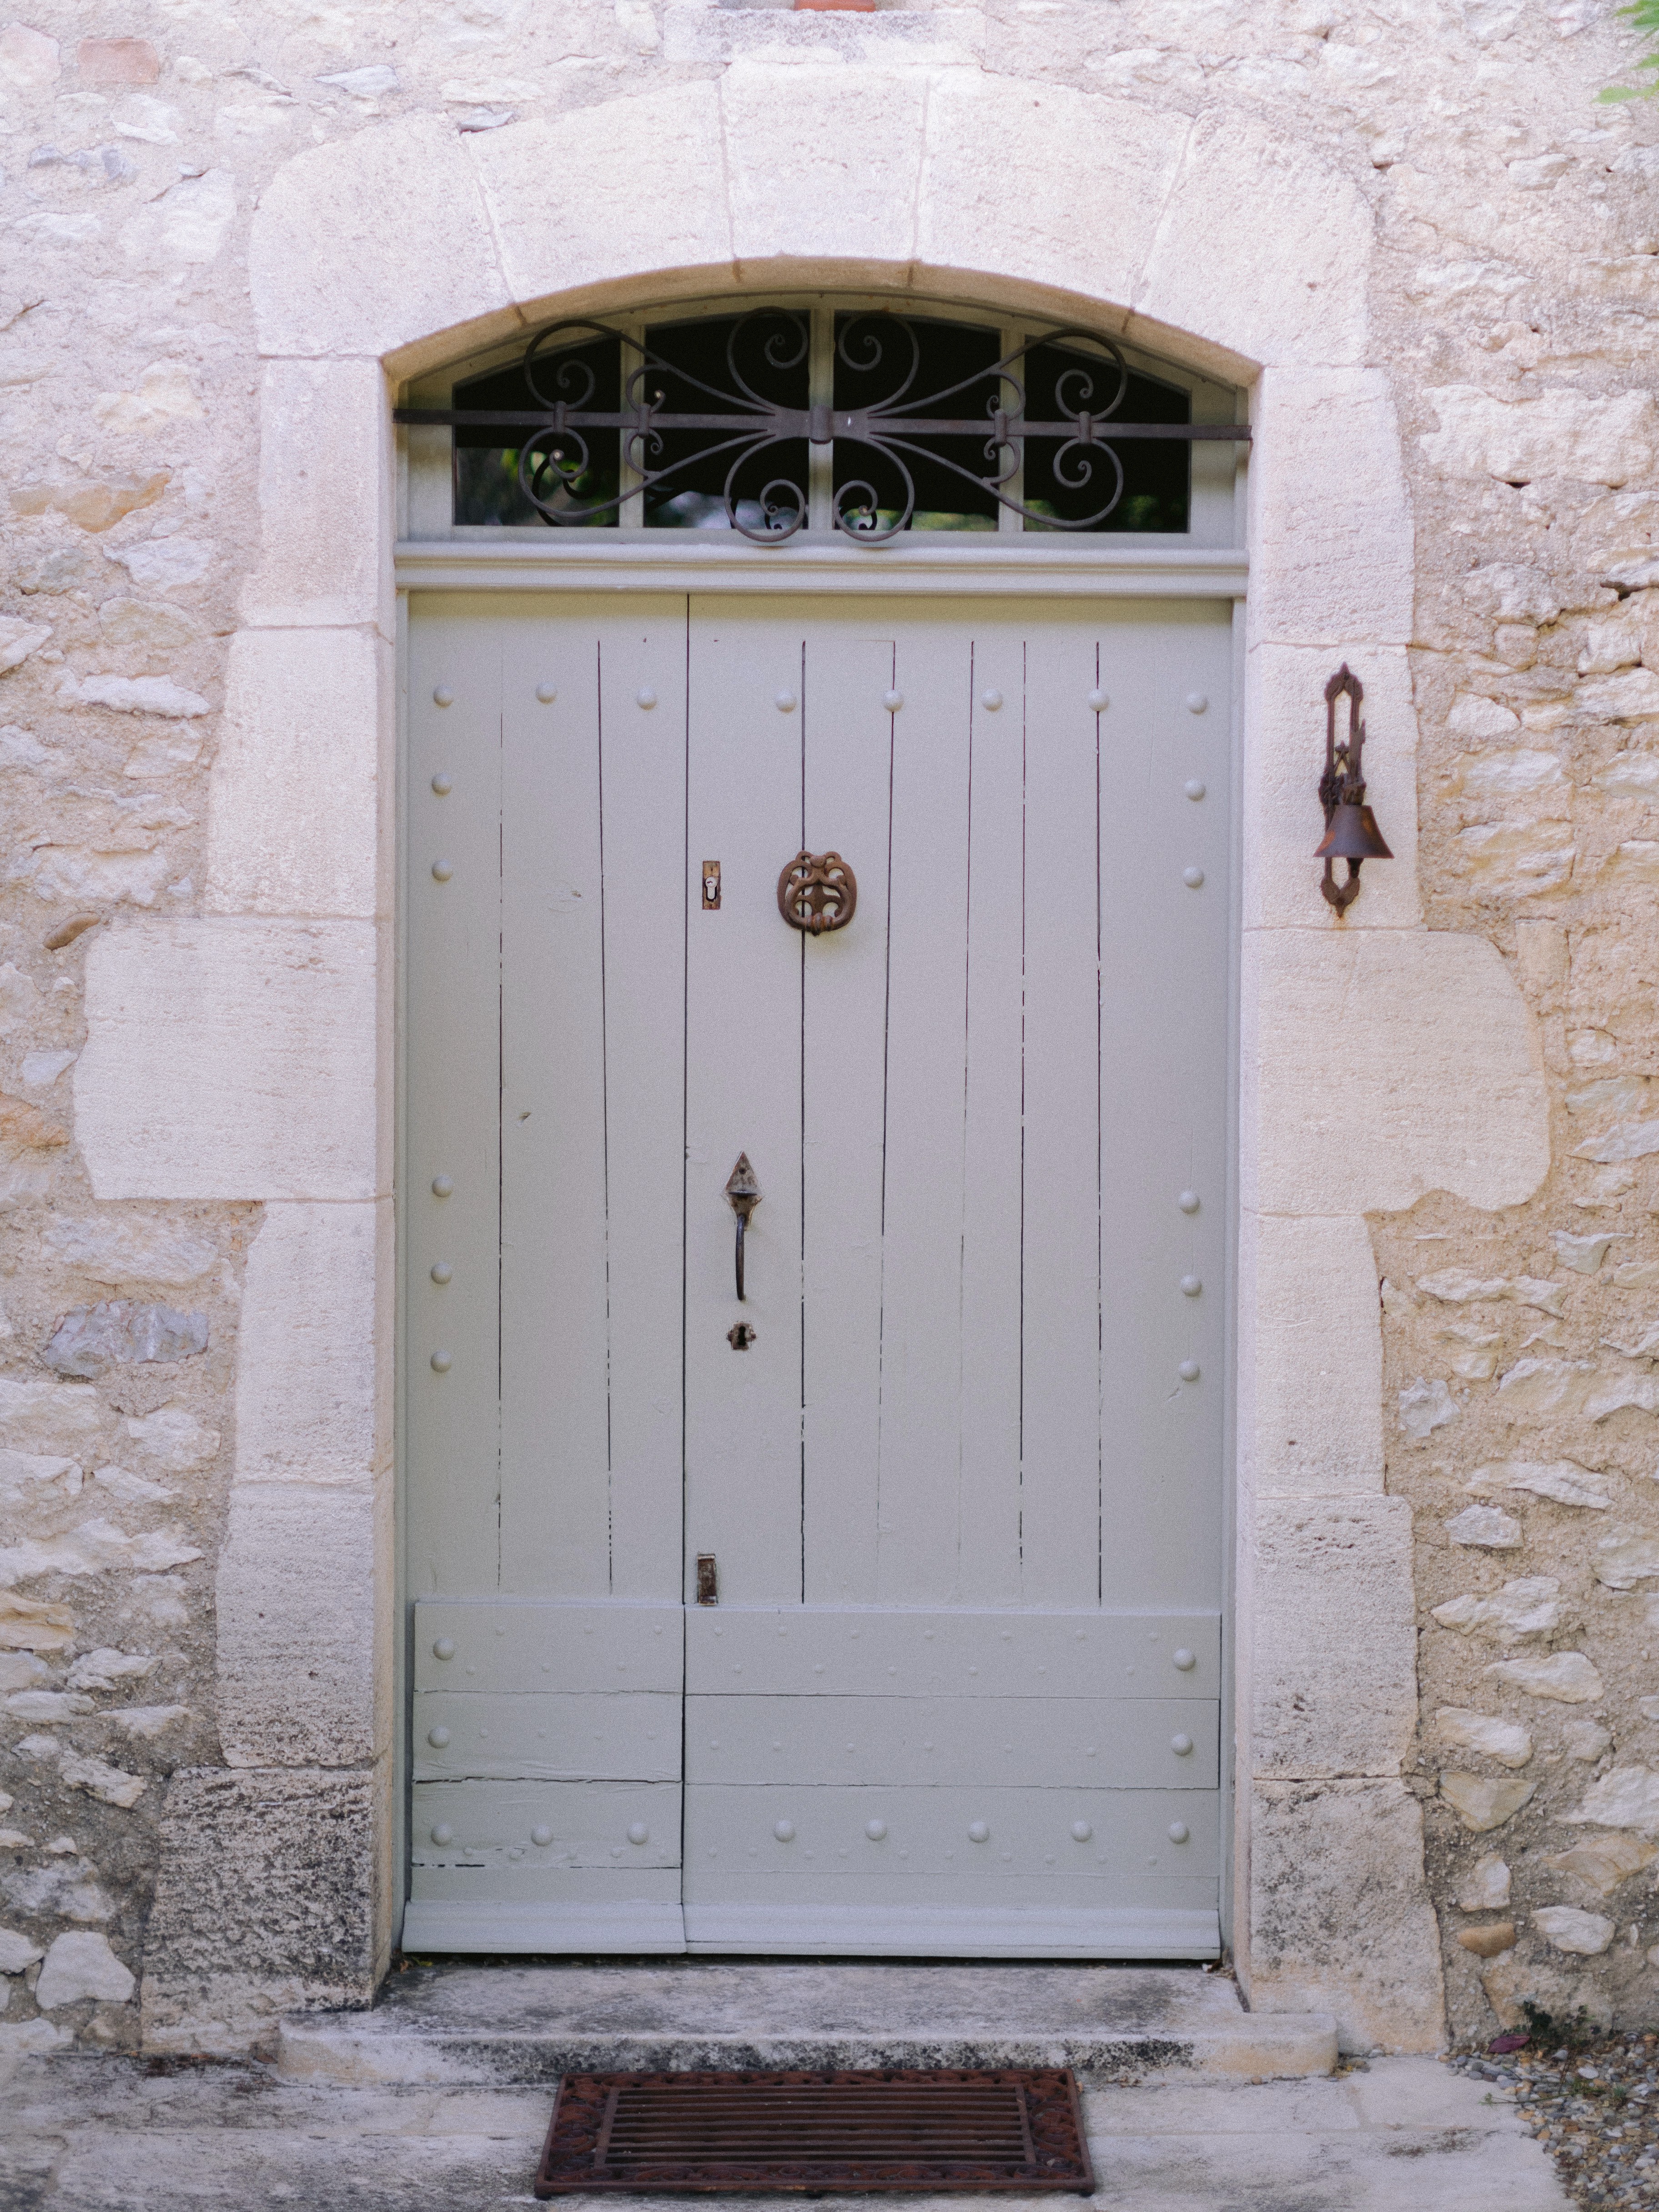 An elegant pale wooden door set in a white stone archway with intricate ironwork and a brass knob, located in a historic building.